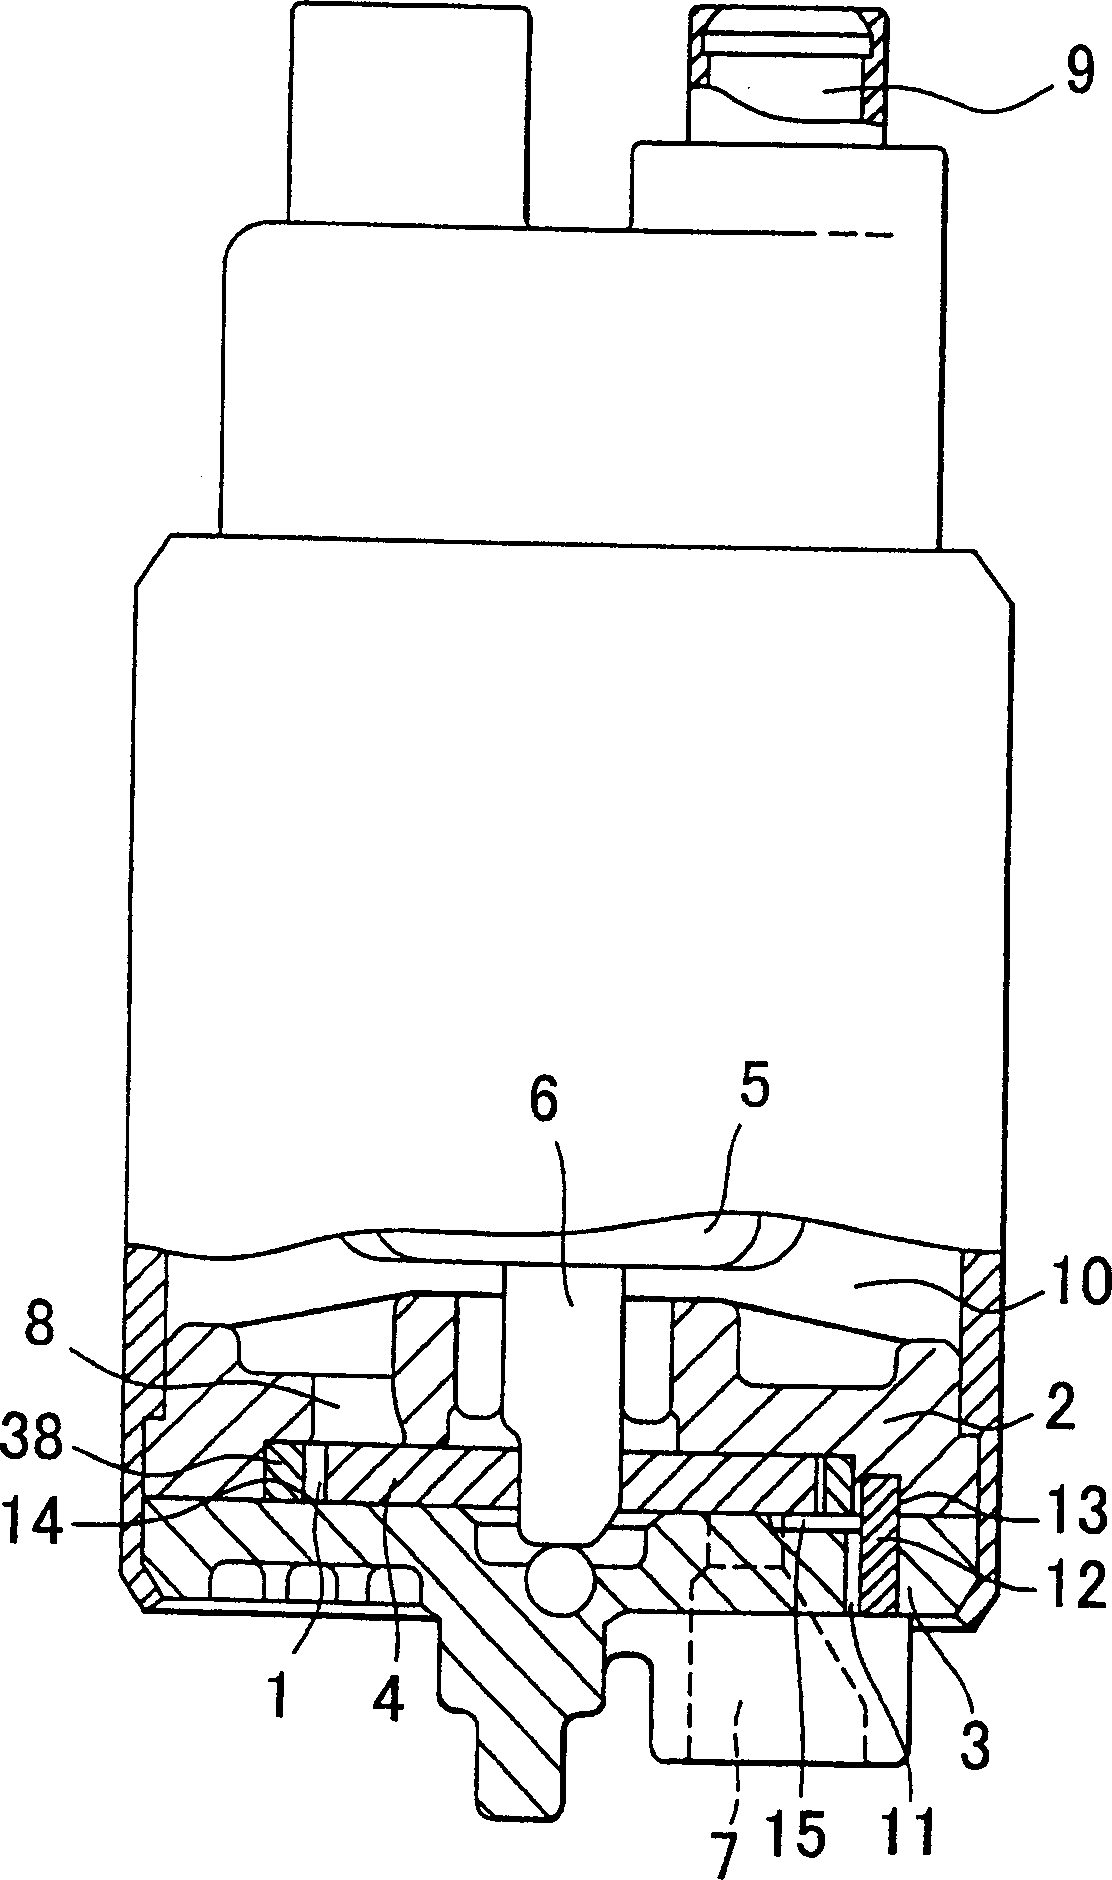 Electric fuel pump for vehicle